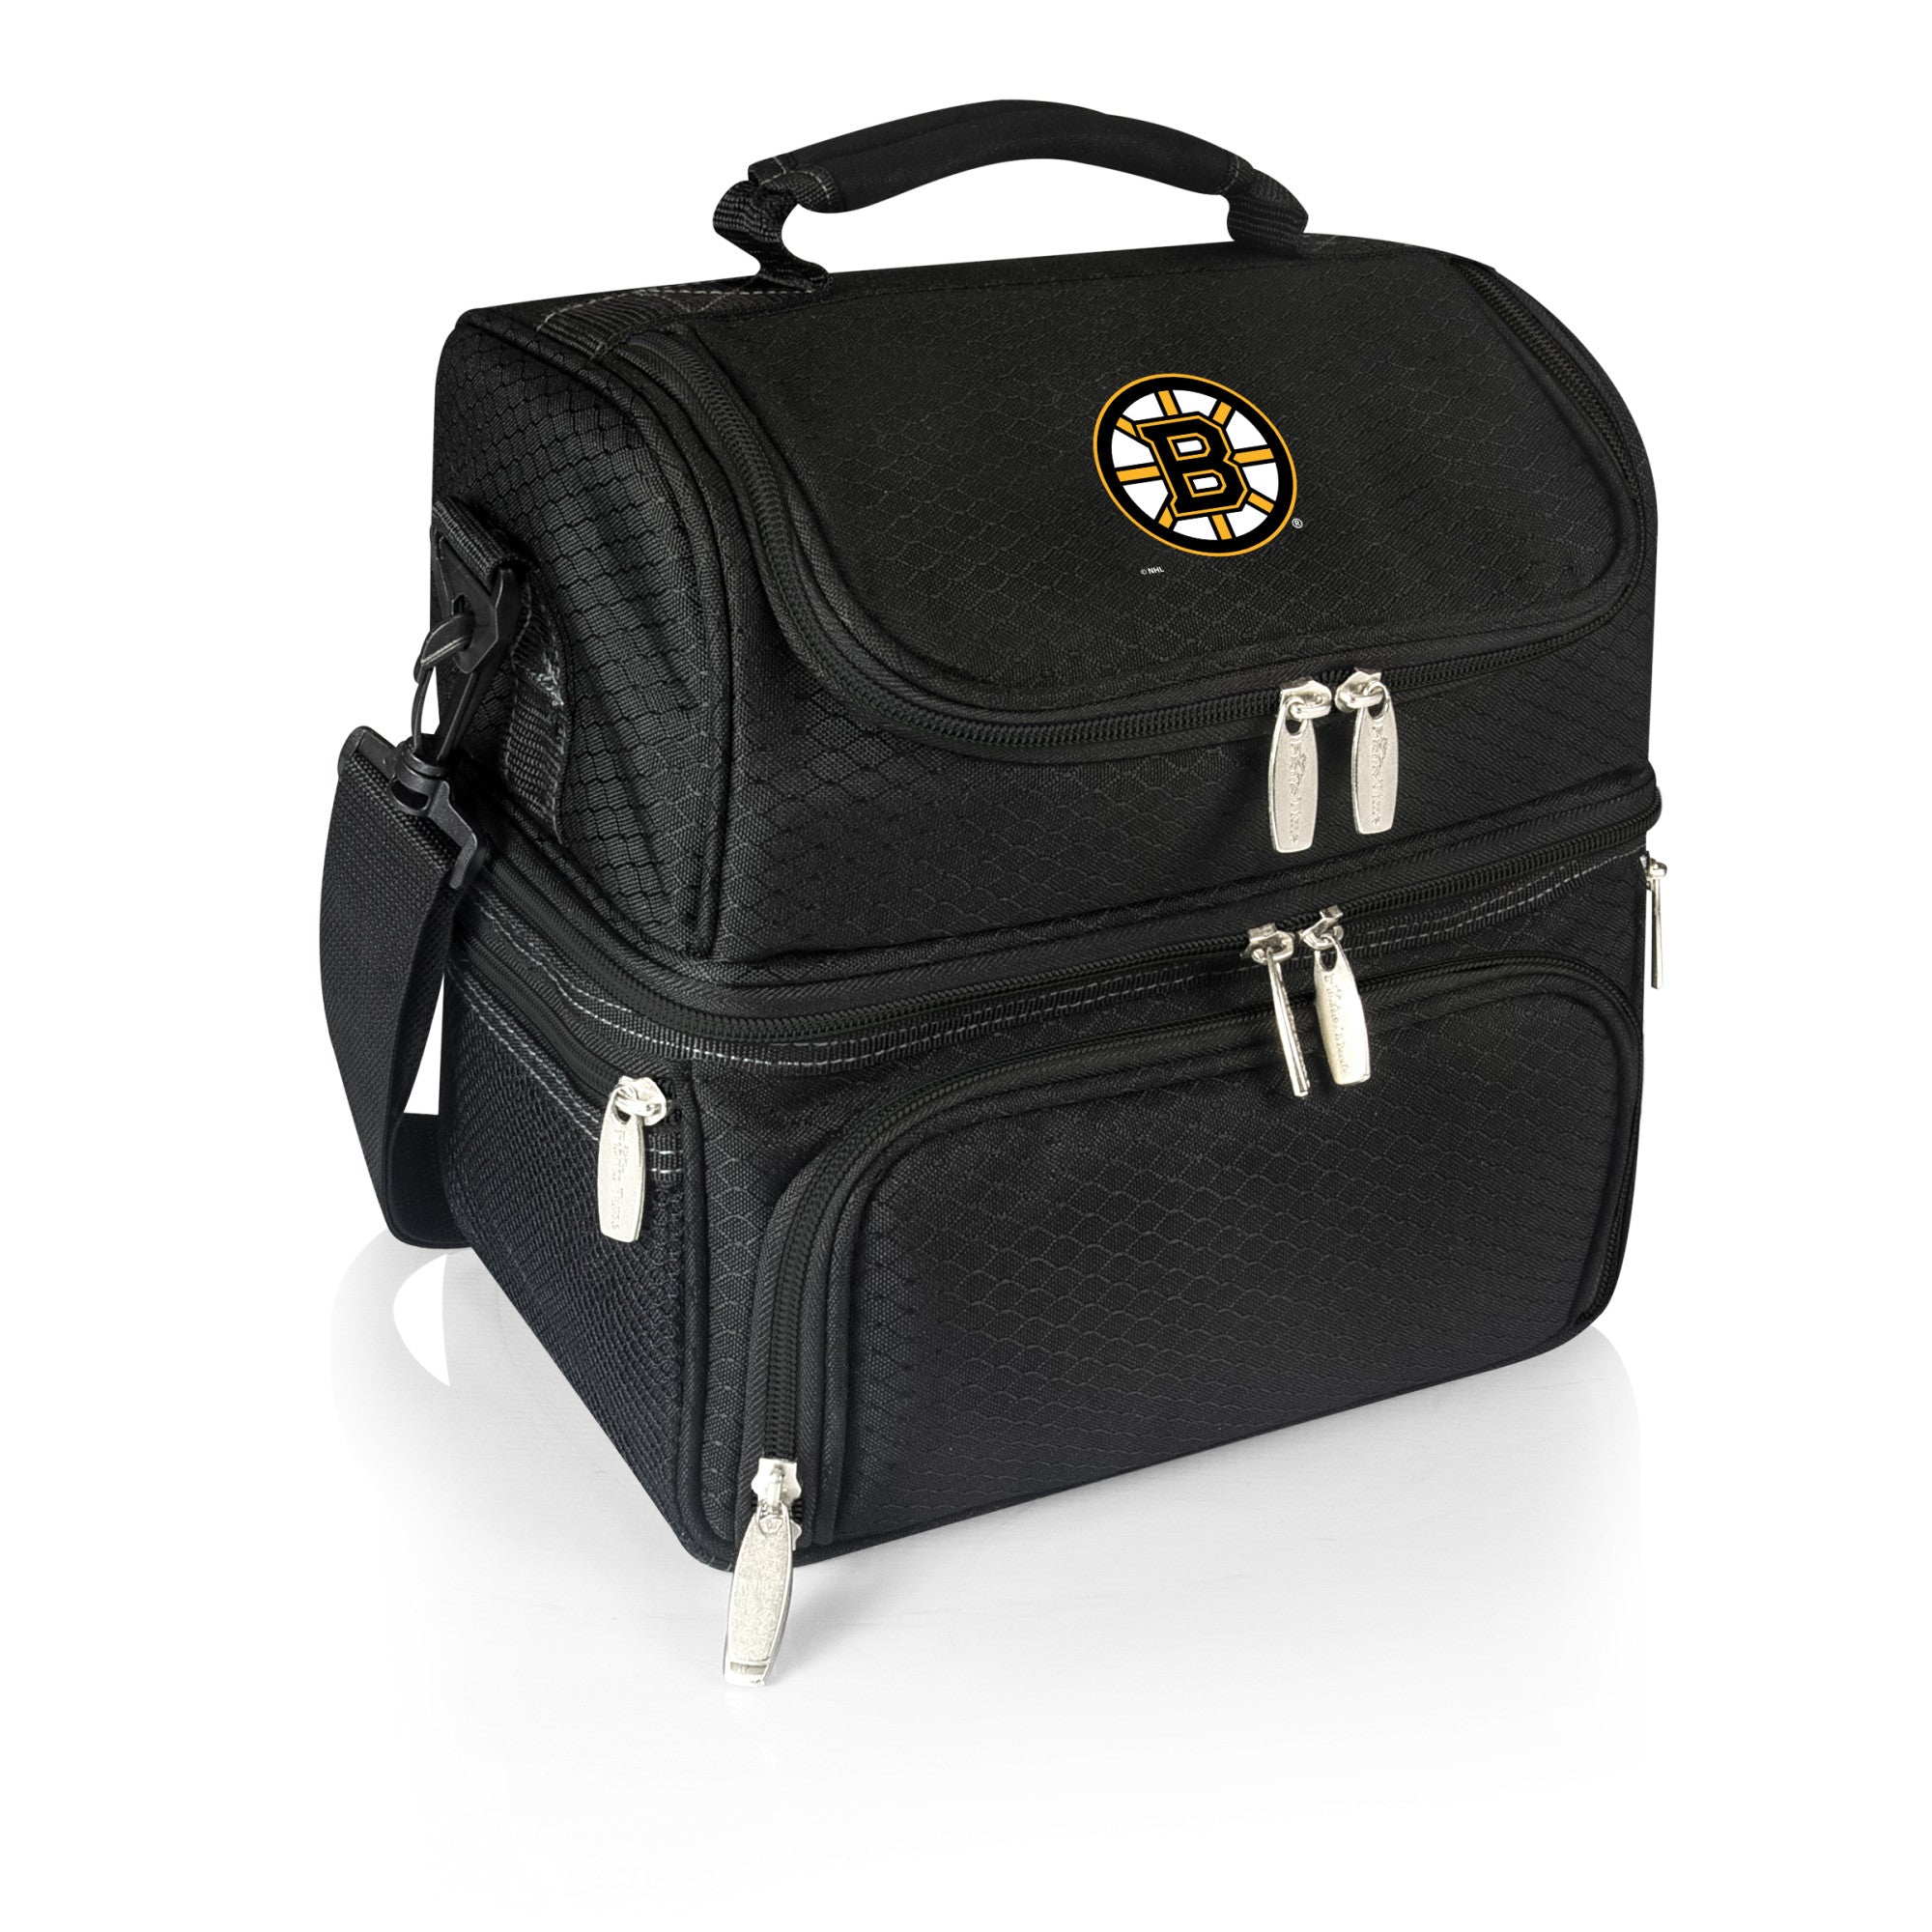 Boston Bruins - Pranzo Lunch Bag Cooler with Utensils